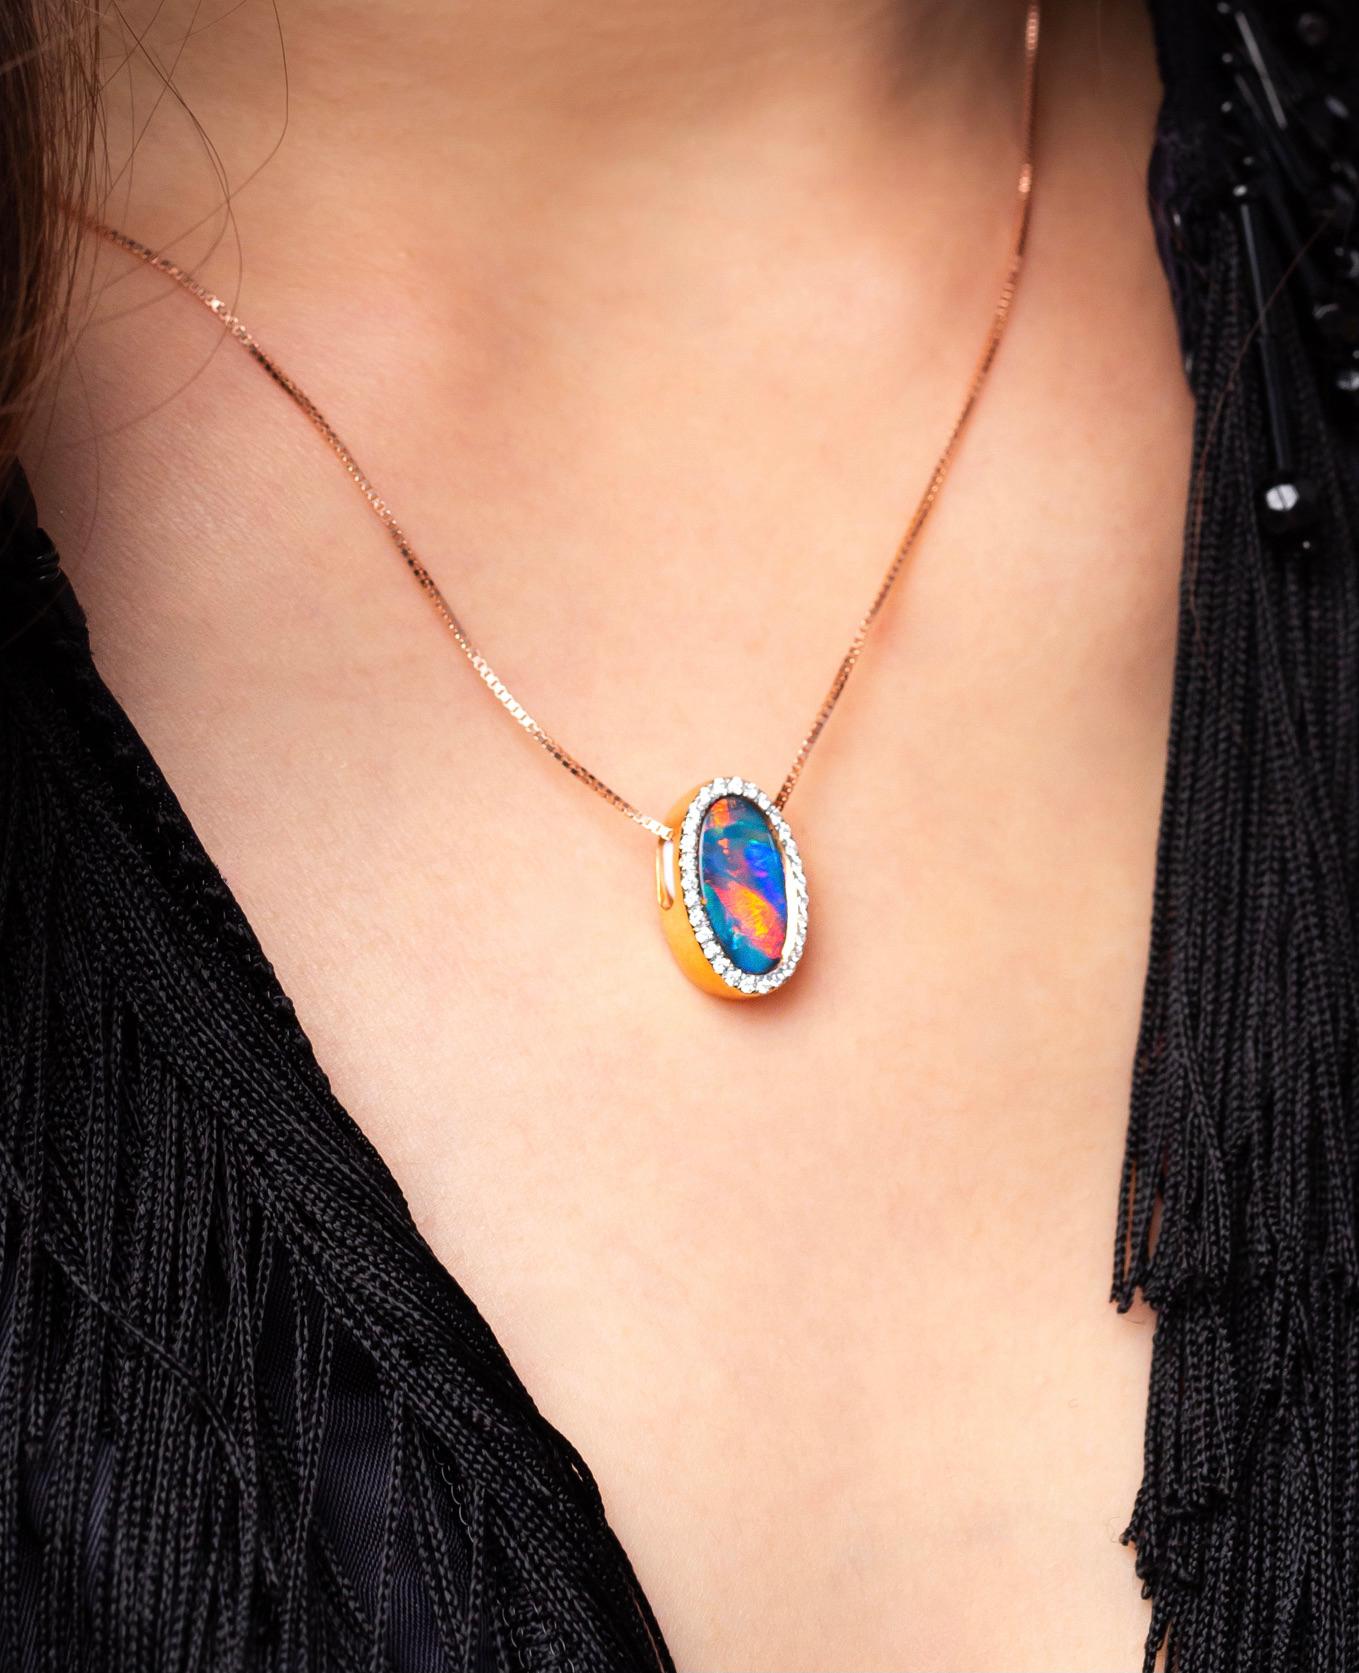 'Heaven’s Eye' is an elegant Australian opal pendant (1.83ct) framed by 29 diamonds and set in 18K rose gold. It’s the striking reds (the rarest and most valuable opal colour) that make this piece so desirable. Dress it up or dress it down. This